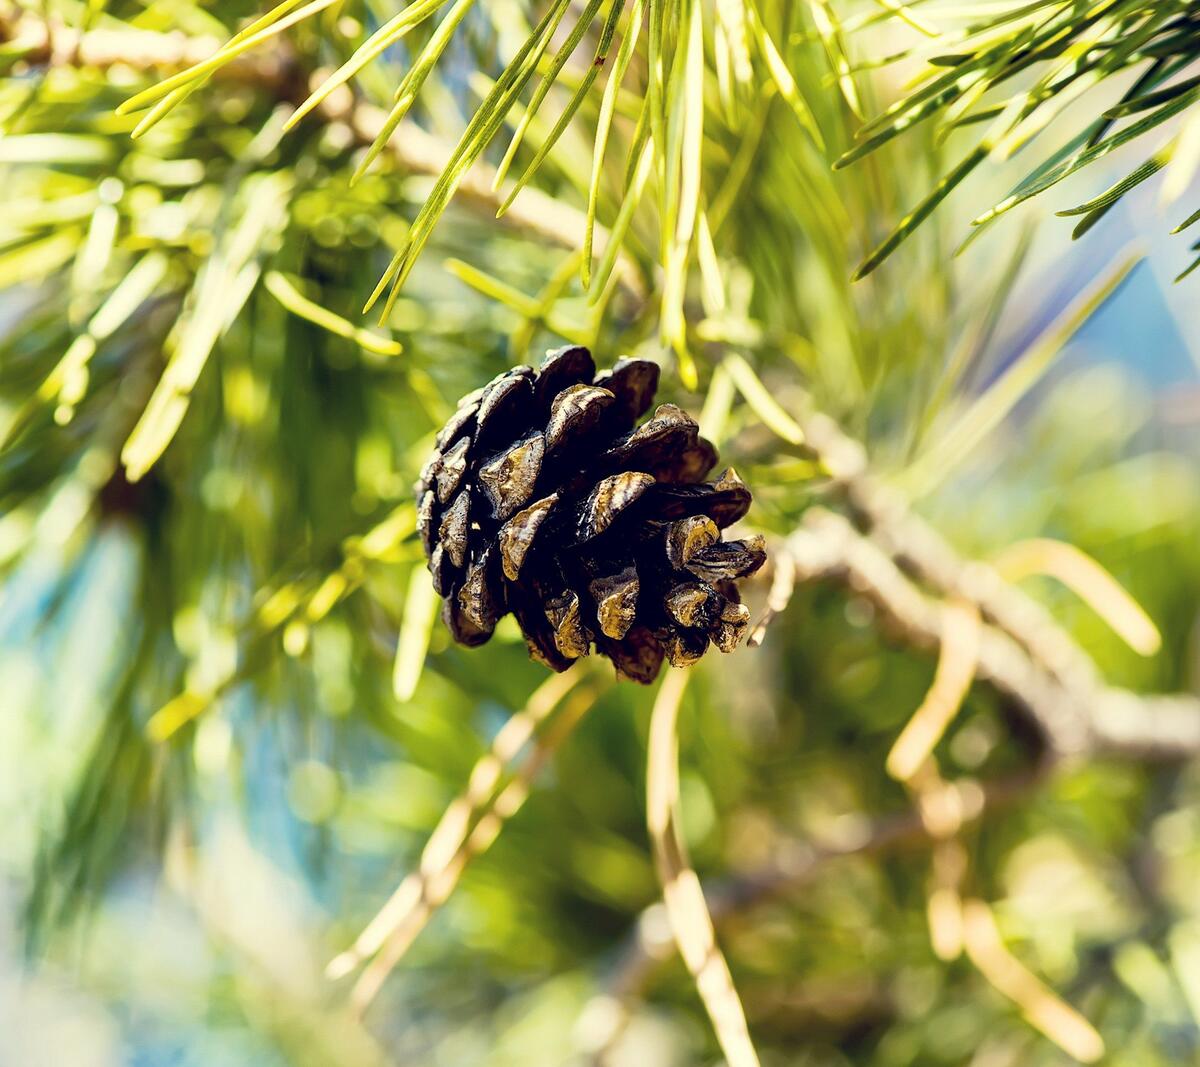 A lone pinecone on a branch